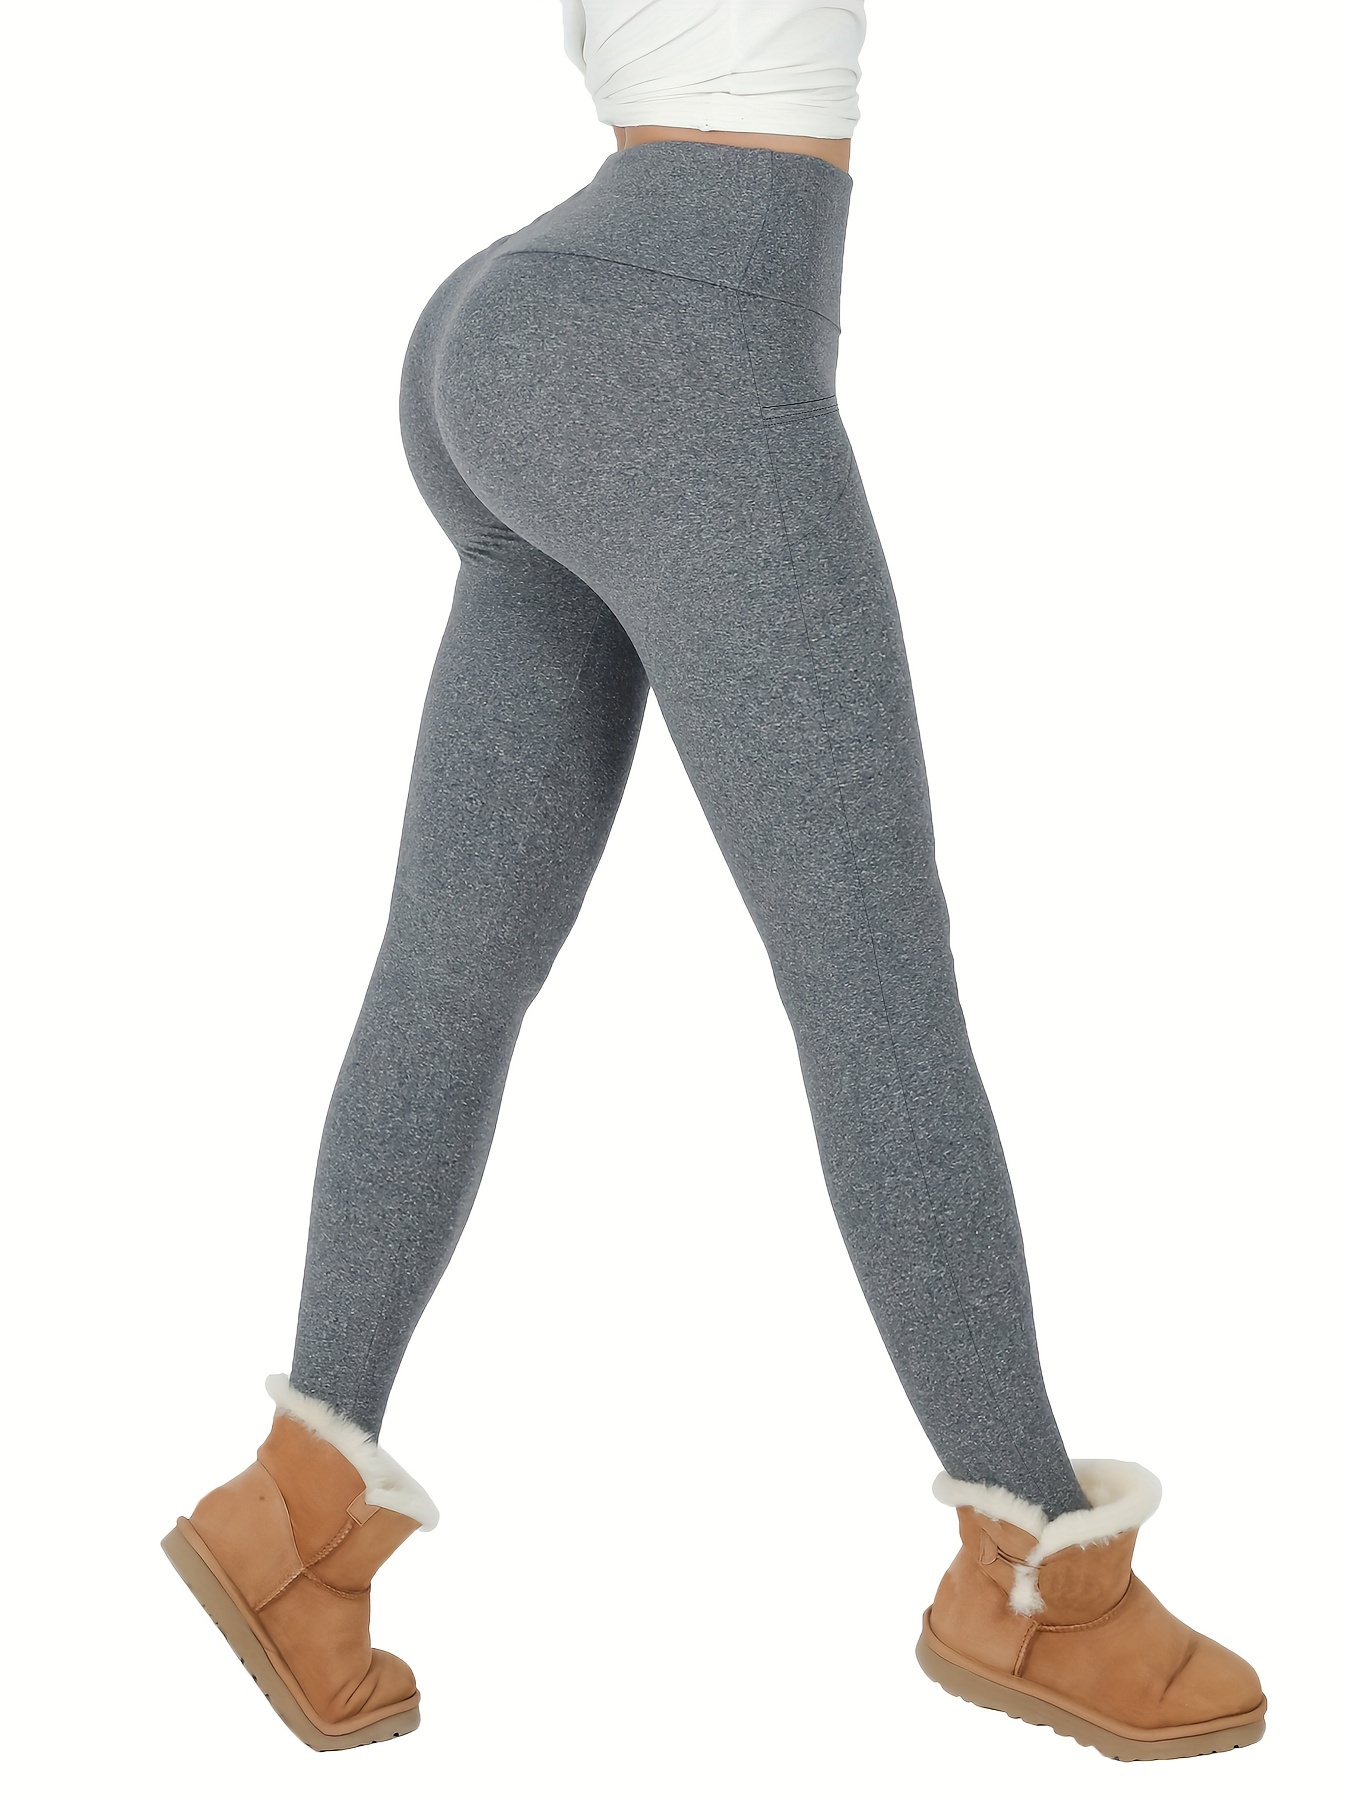 High Waist Shark Skin Cycling Fleece Lined Leggings Primark With Fleece  Lining For Women Perfect For Hip Lifting, Yoga, And Sports Activities From  Dhgatemen, $31.34